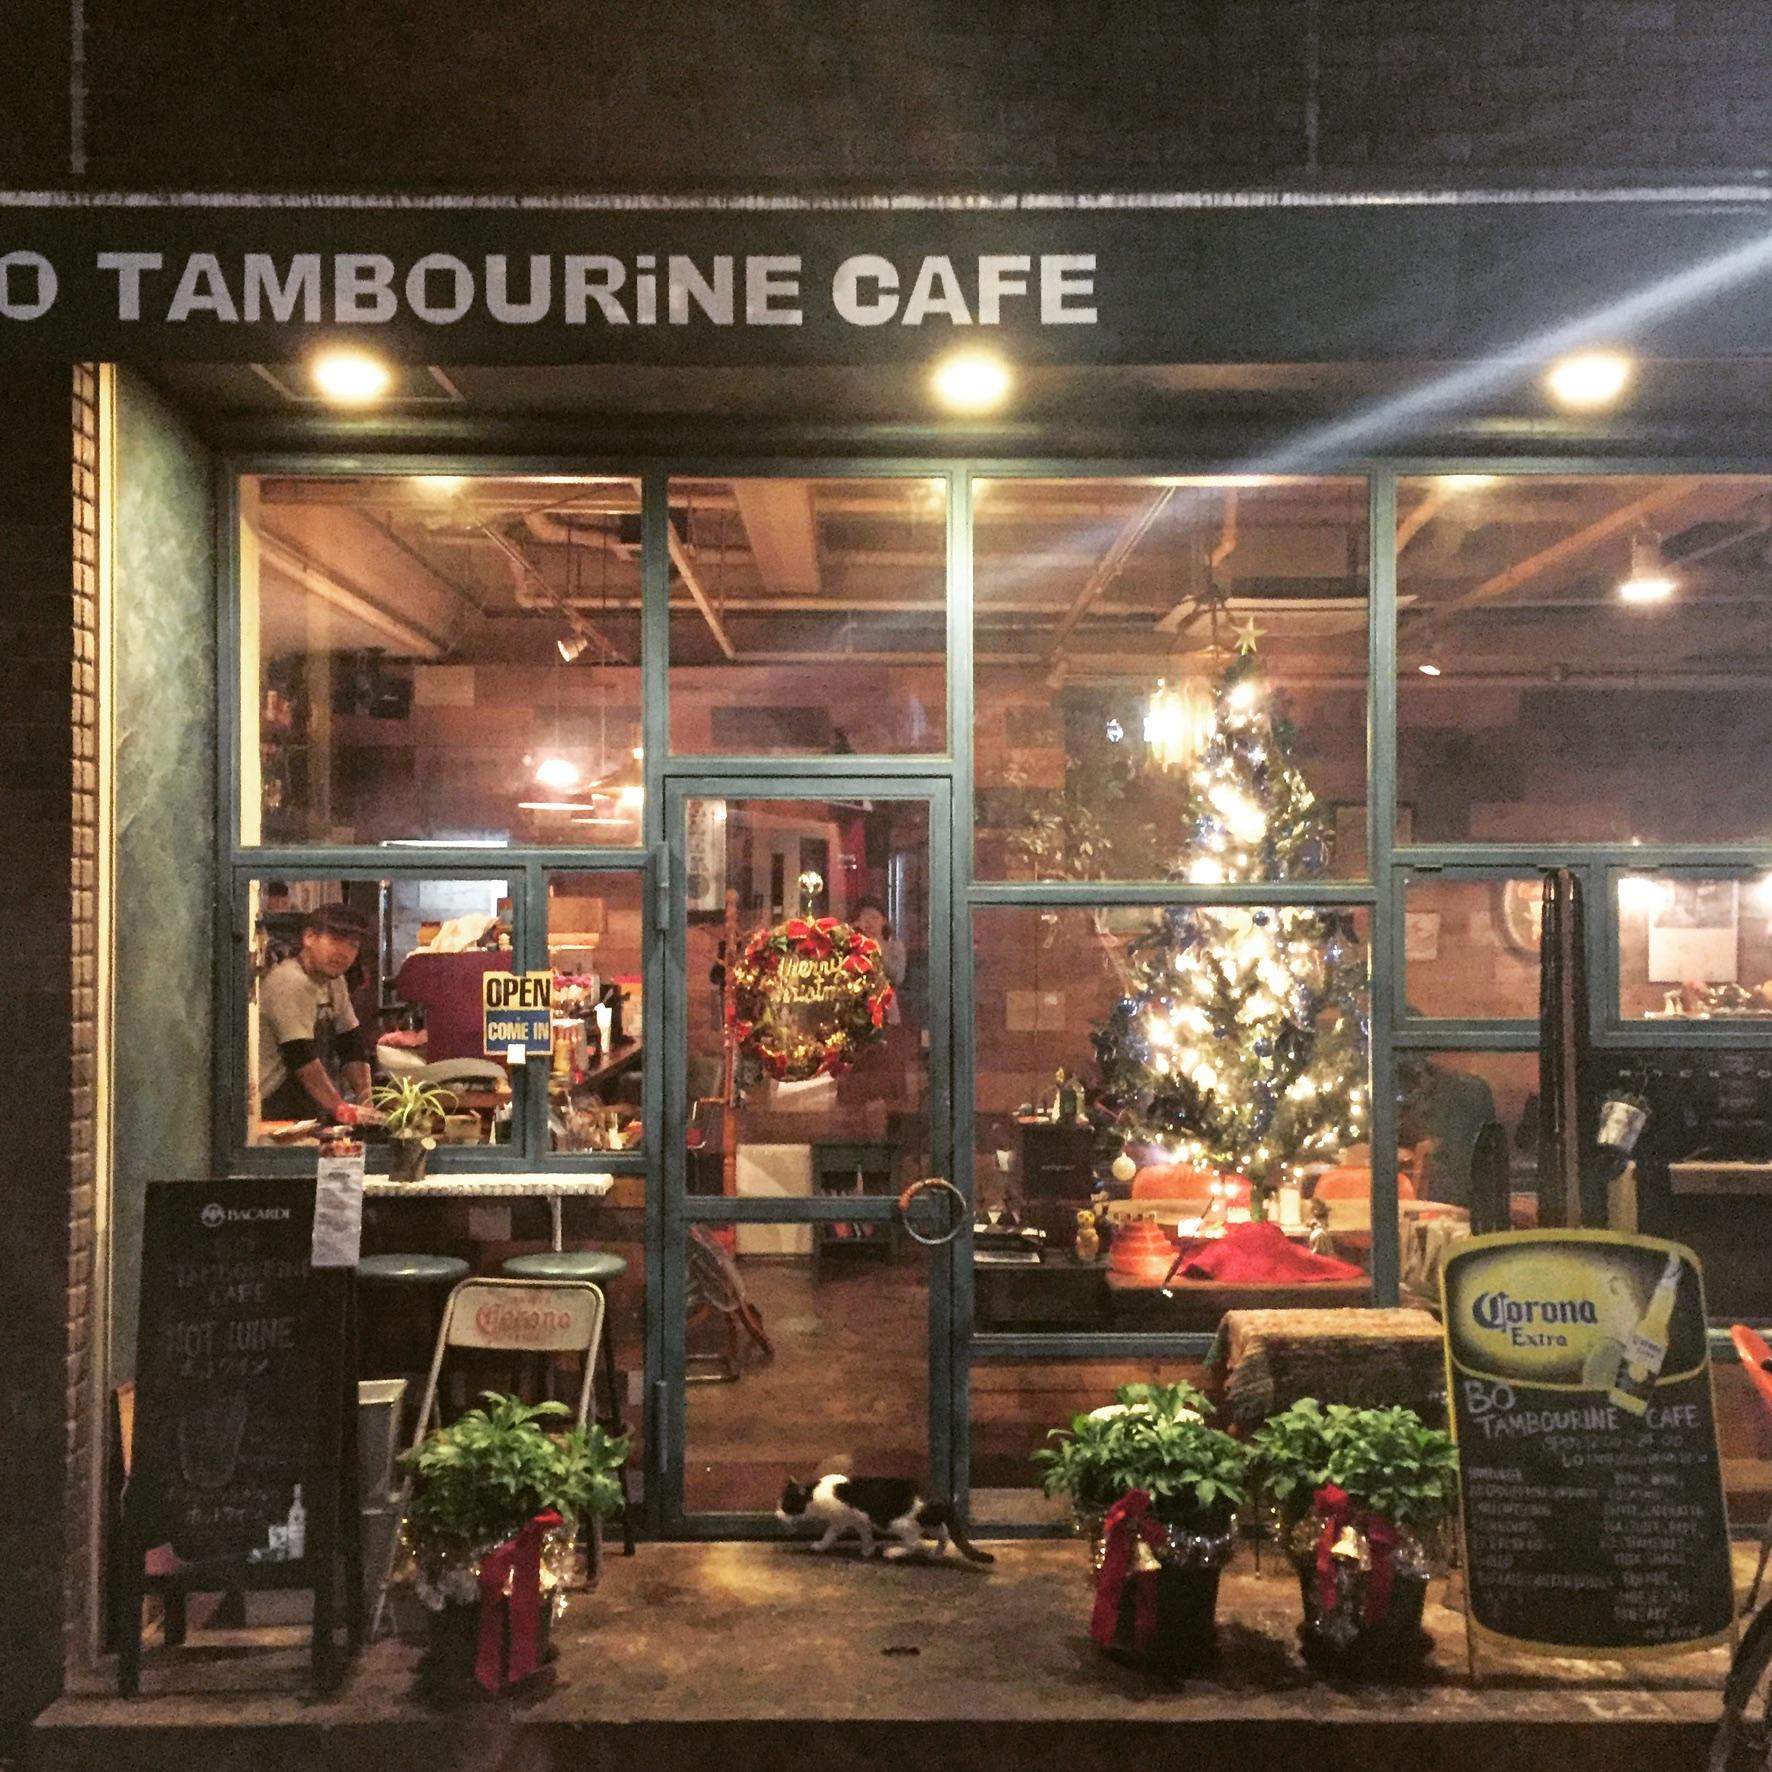 Cover image of this place Bo Tambourine Cafe (ボ タンバリン カフェ)